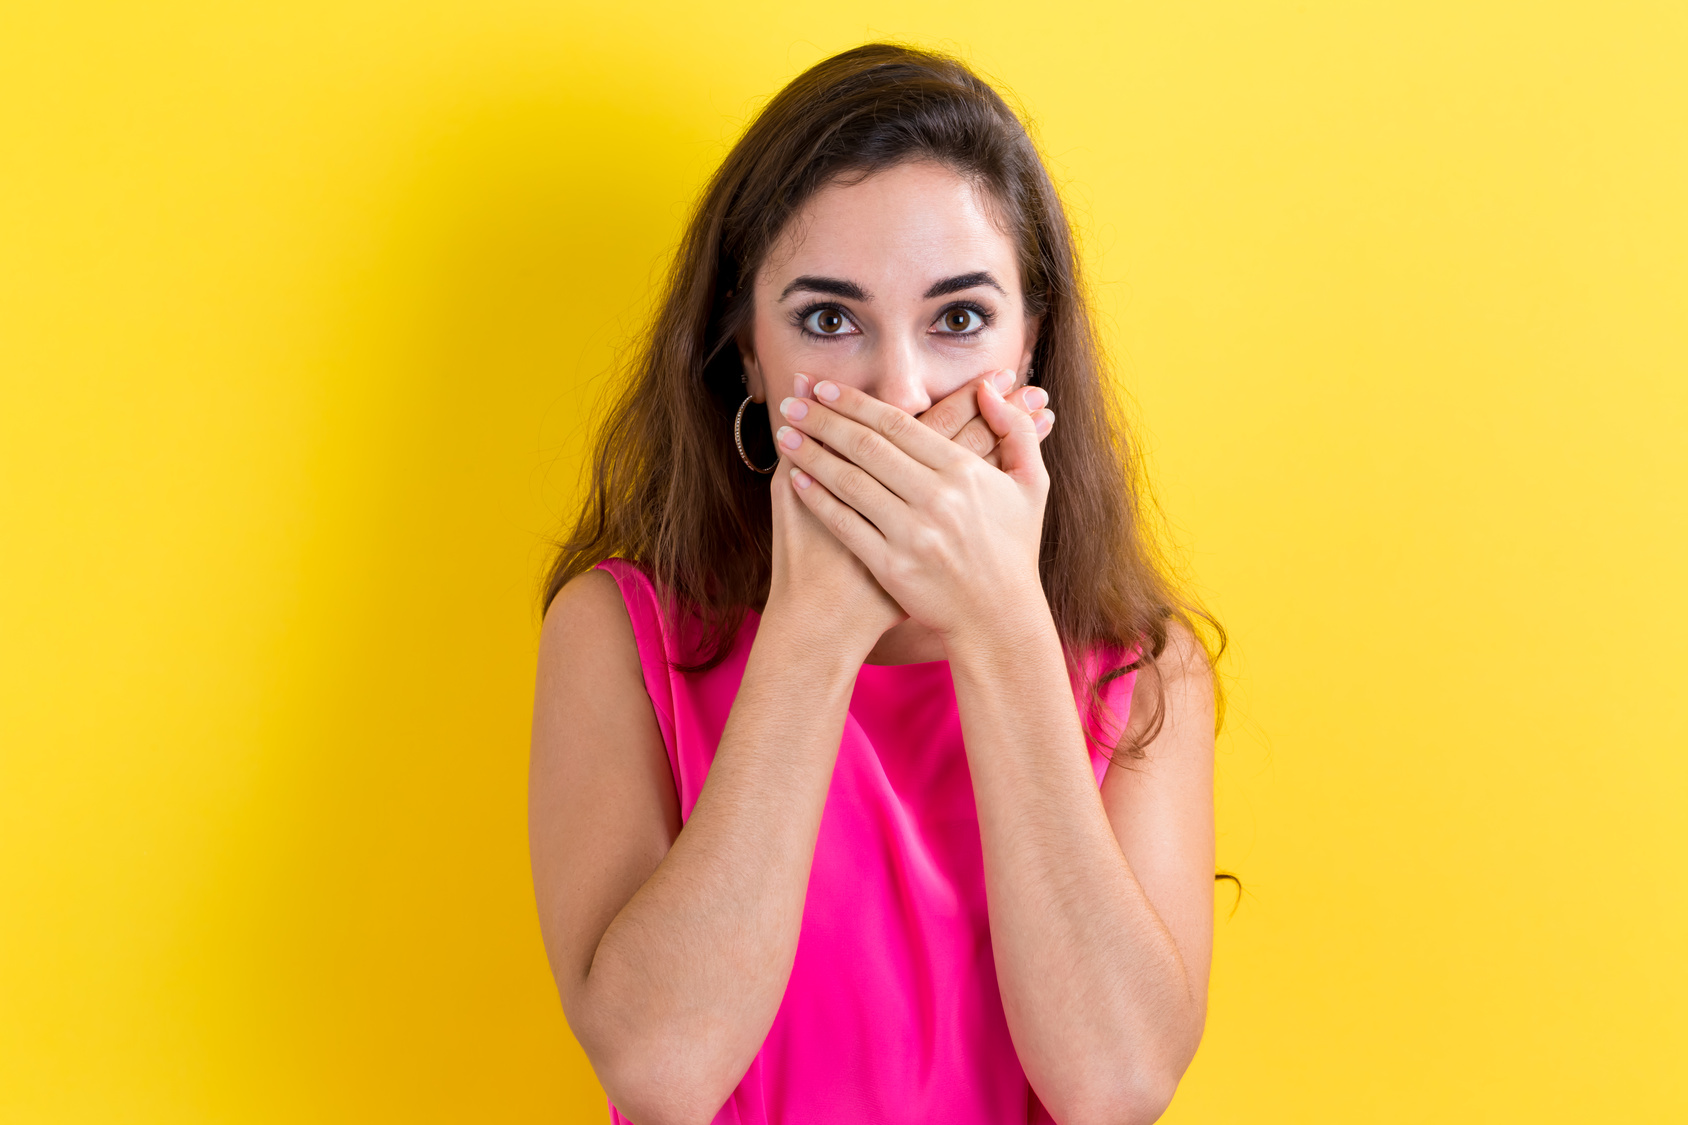 Young woman covering her mouth on a yellow background